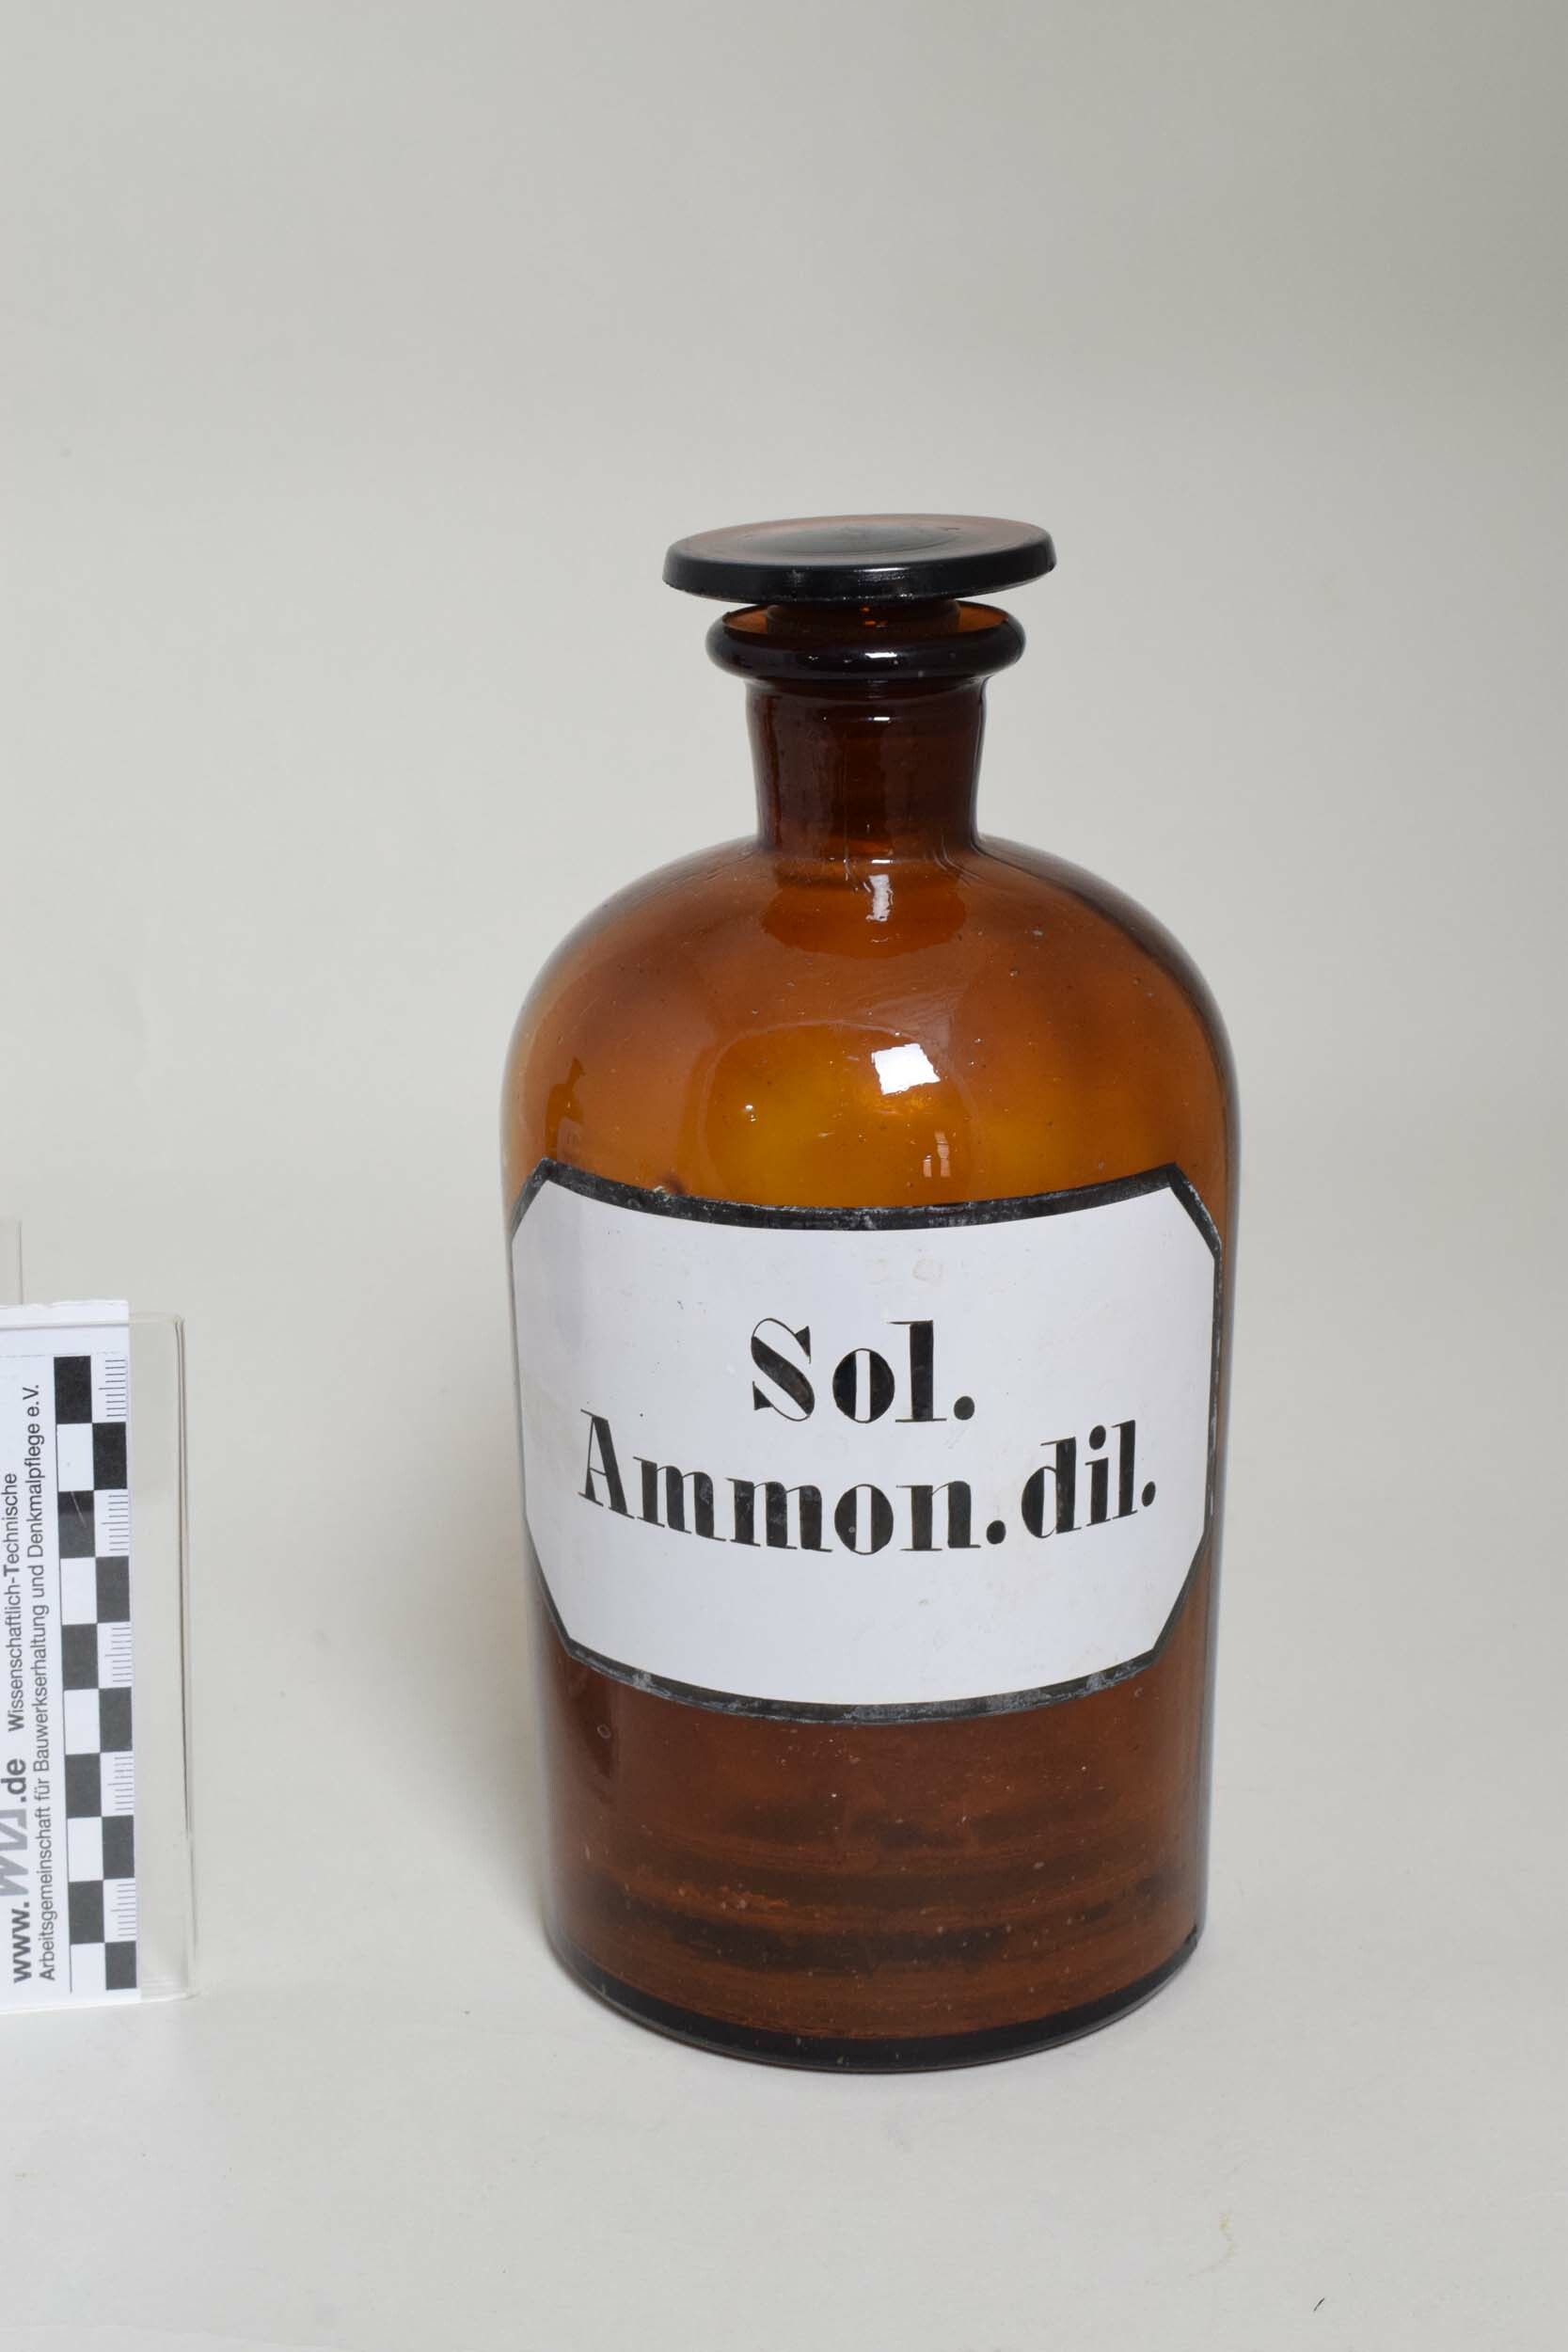 Apothekenflasche "Sol. Ammon. dil." (Heimatmuseum Dohna CC BY-NC-SA)